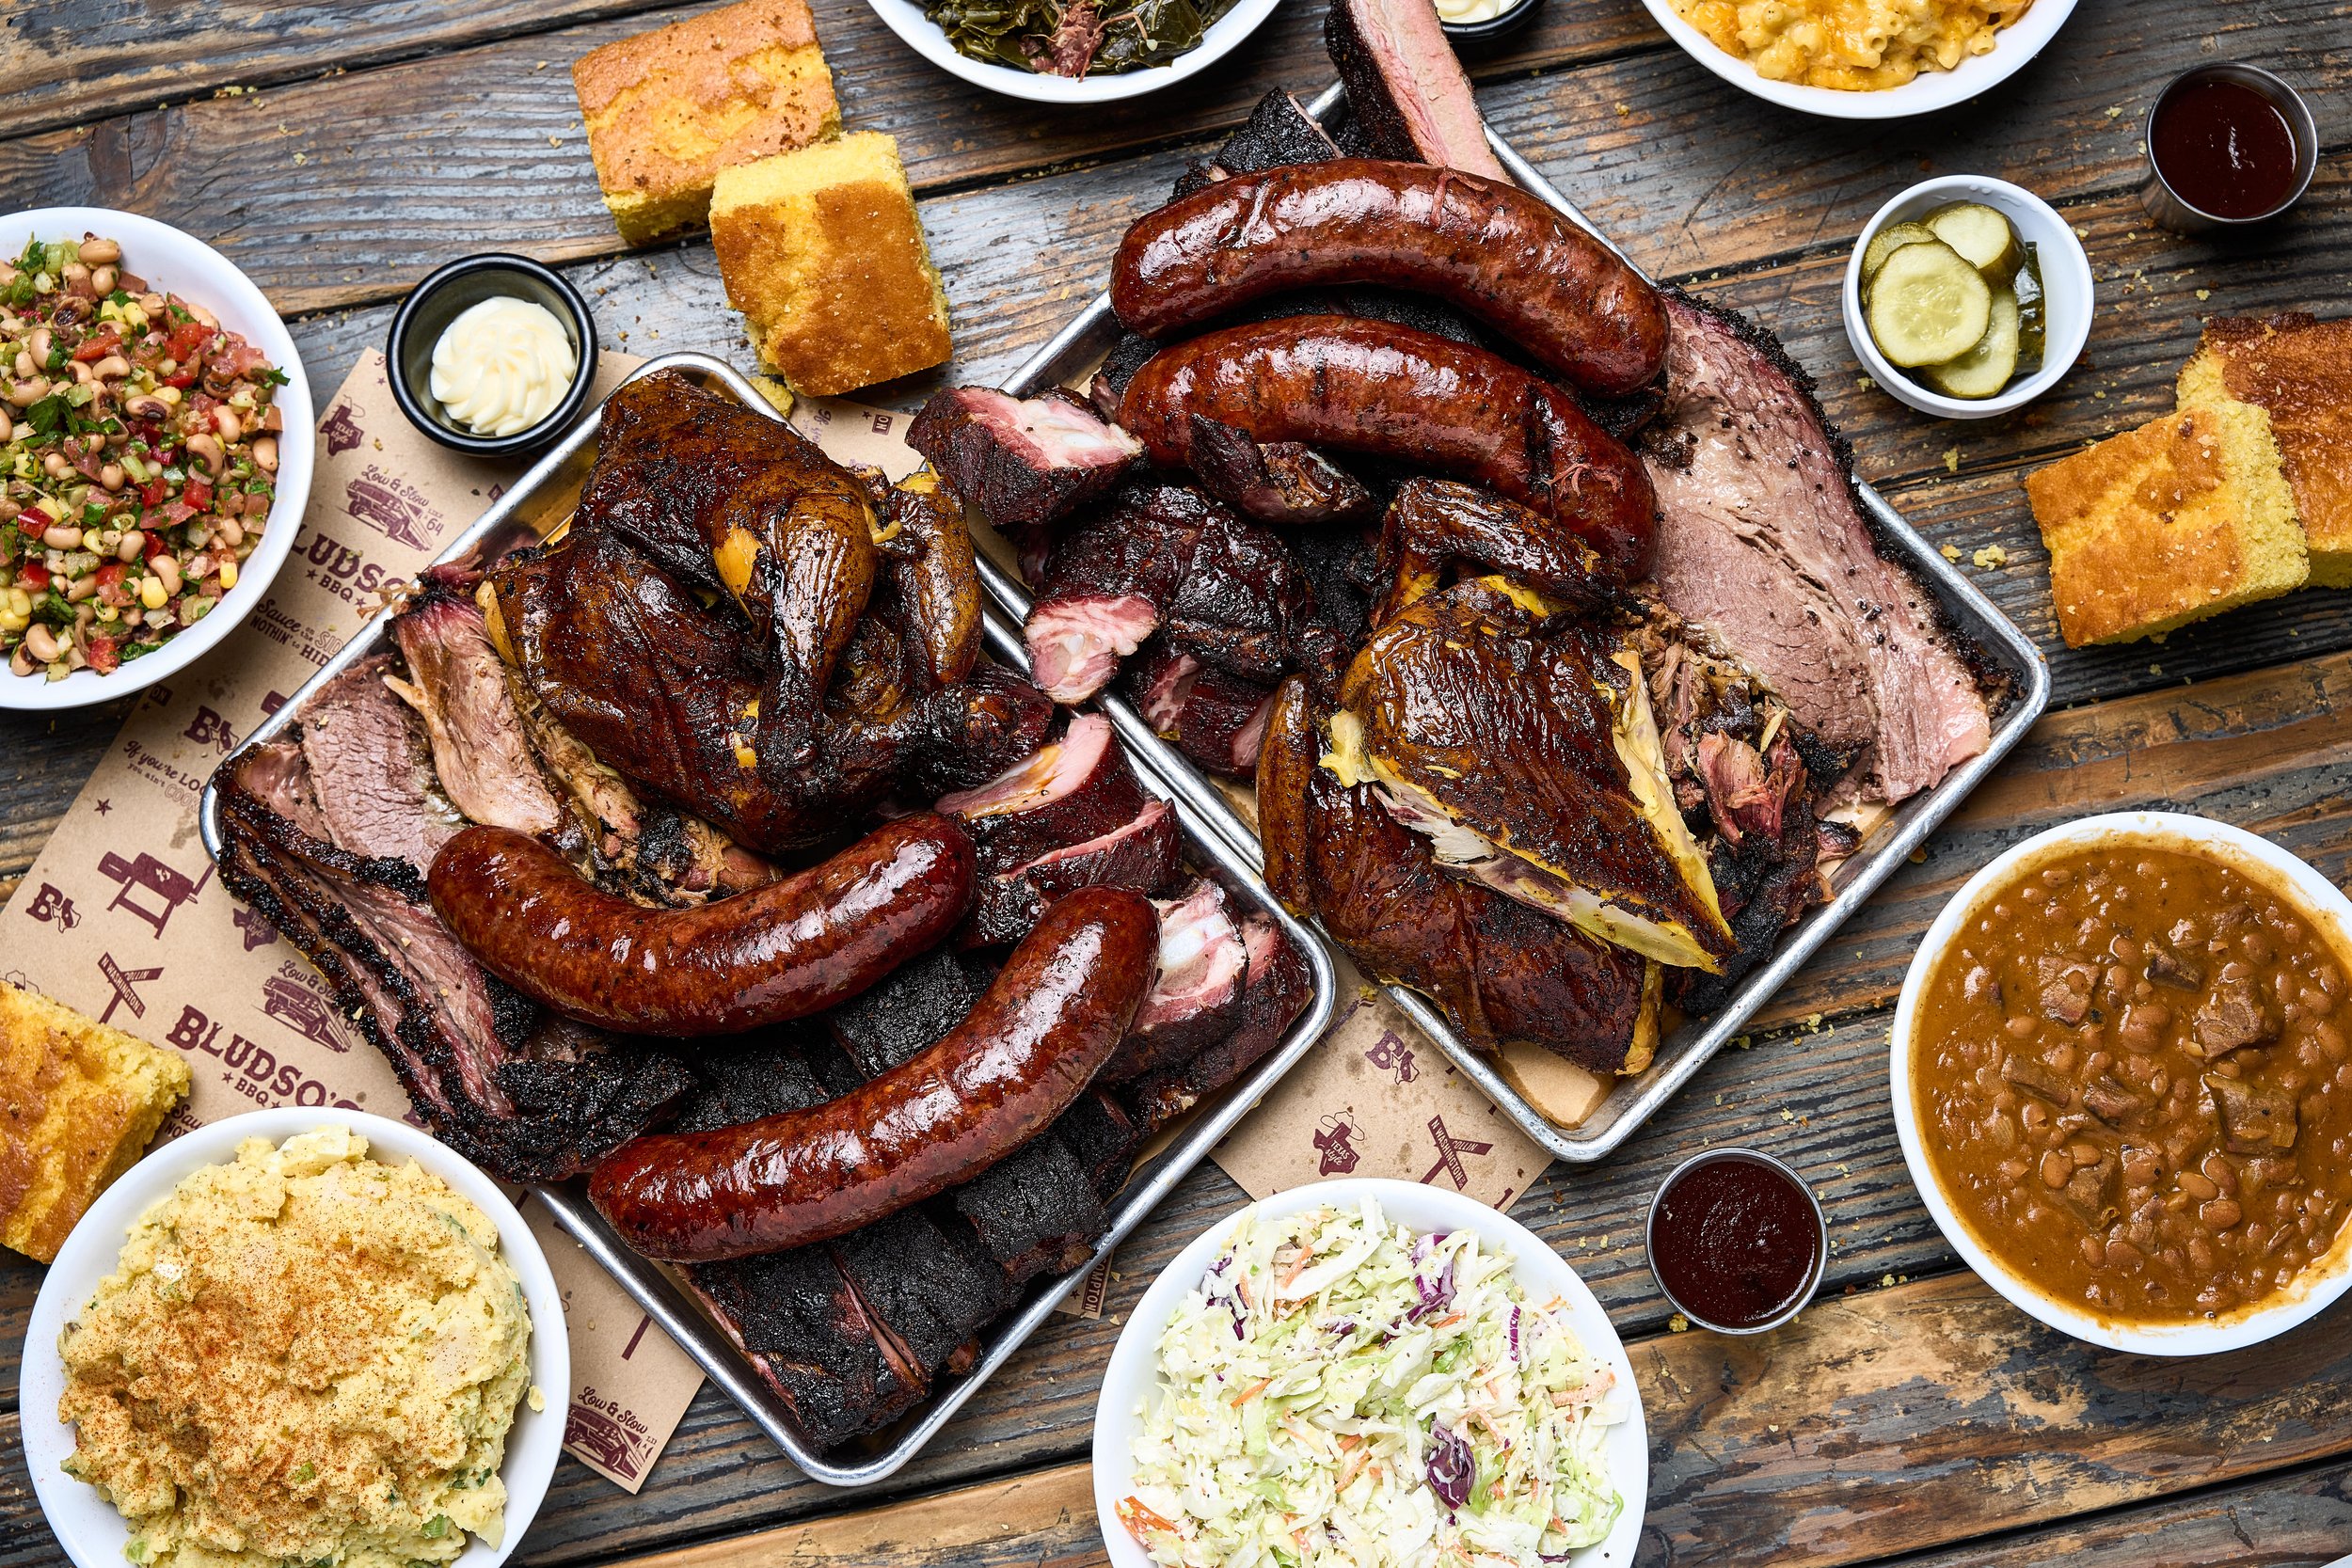 Image of various BBQ dishes at Bludso’s BBQ restaurant